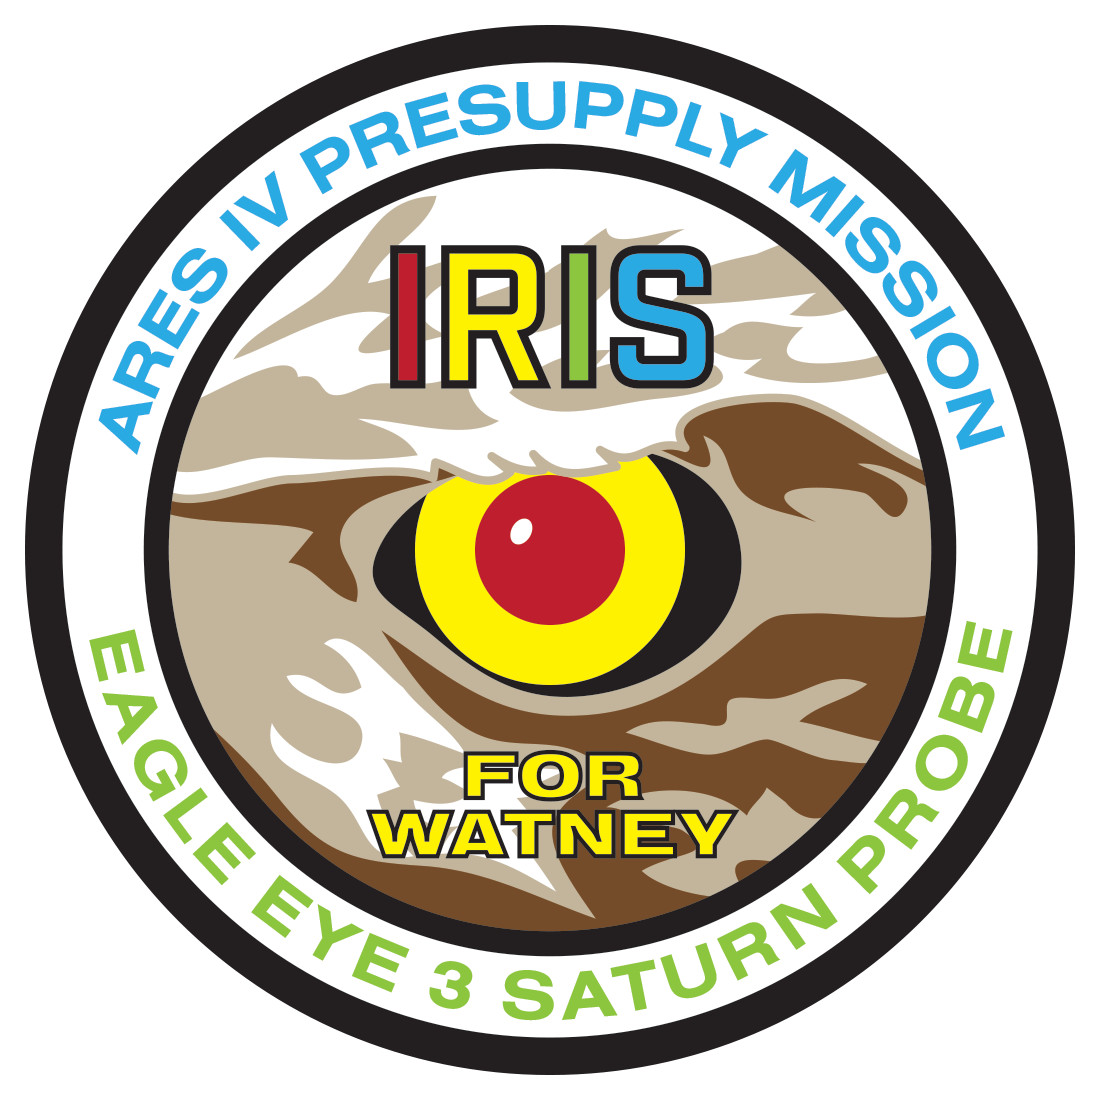 Early design for the IRIS mission patch. Feedback suggested (correctly) that the picture elements took the mission names TOO literally. The "For Watne